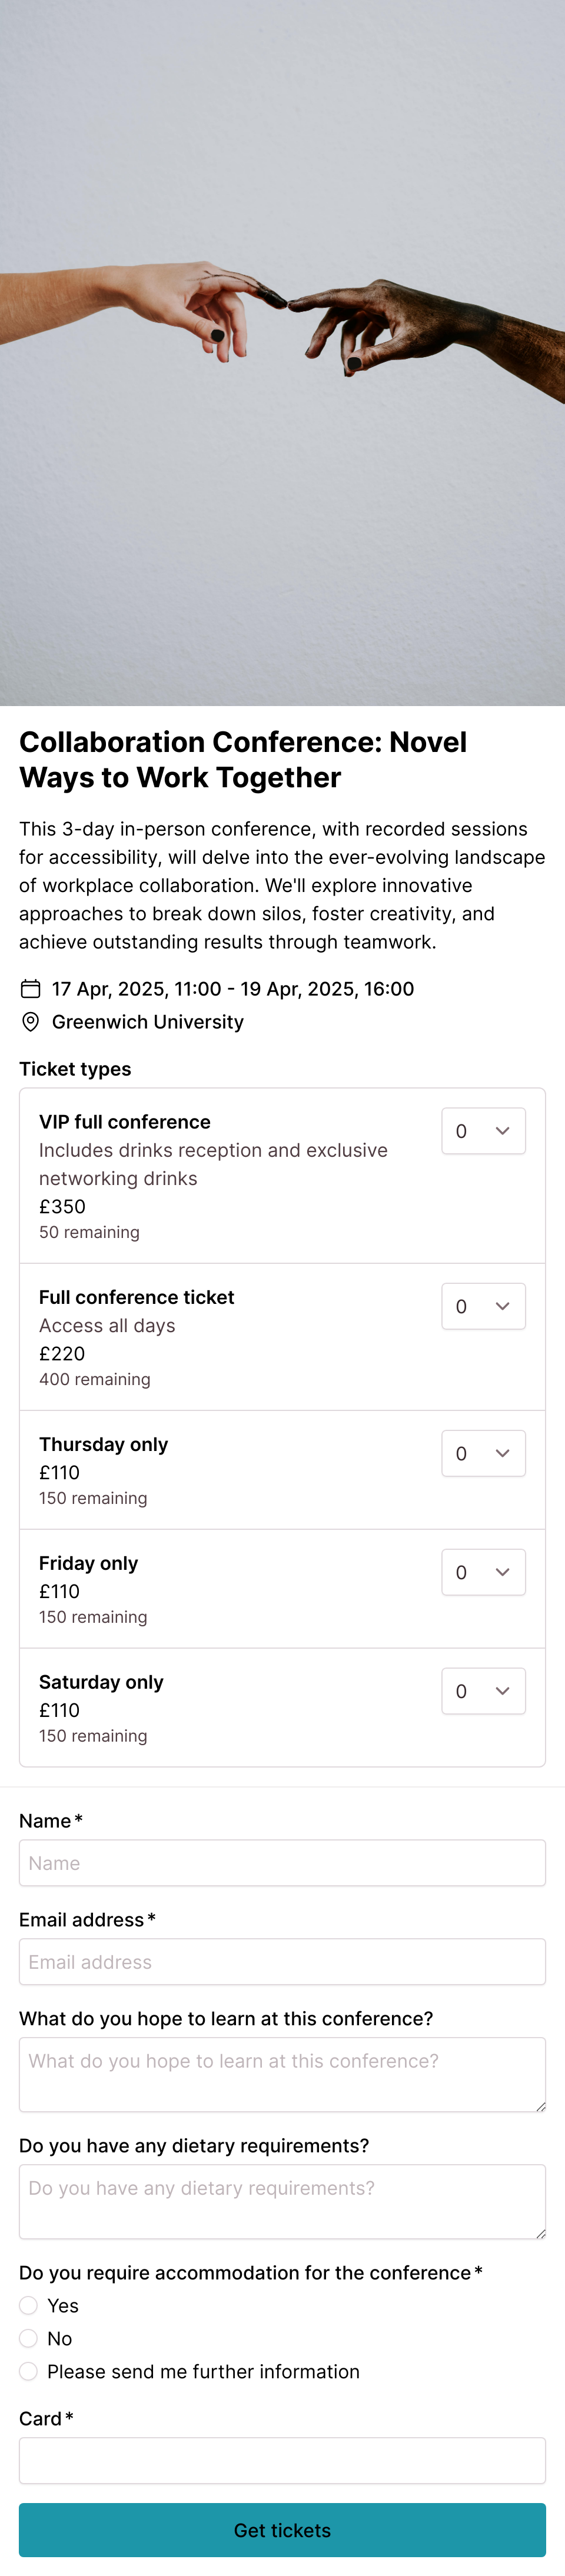 3 day conference event template